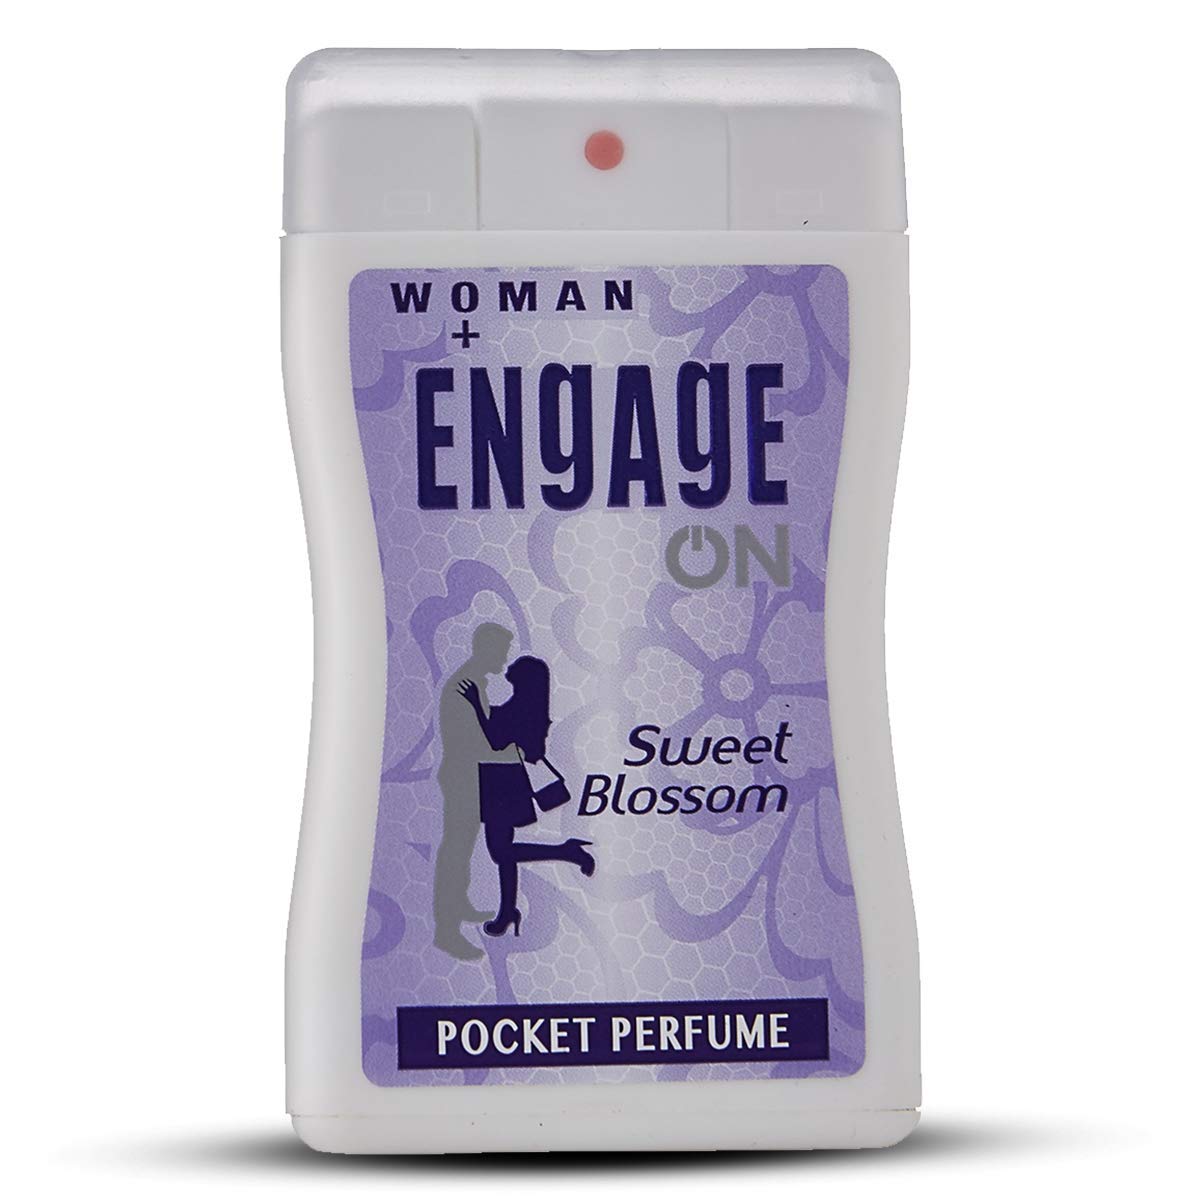 Engage On Pocket Perfume for Men - 17 ml | Pack of 6